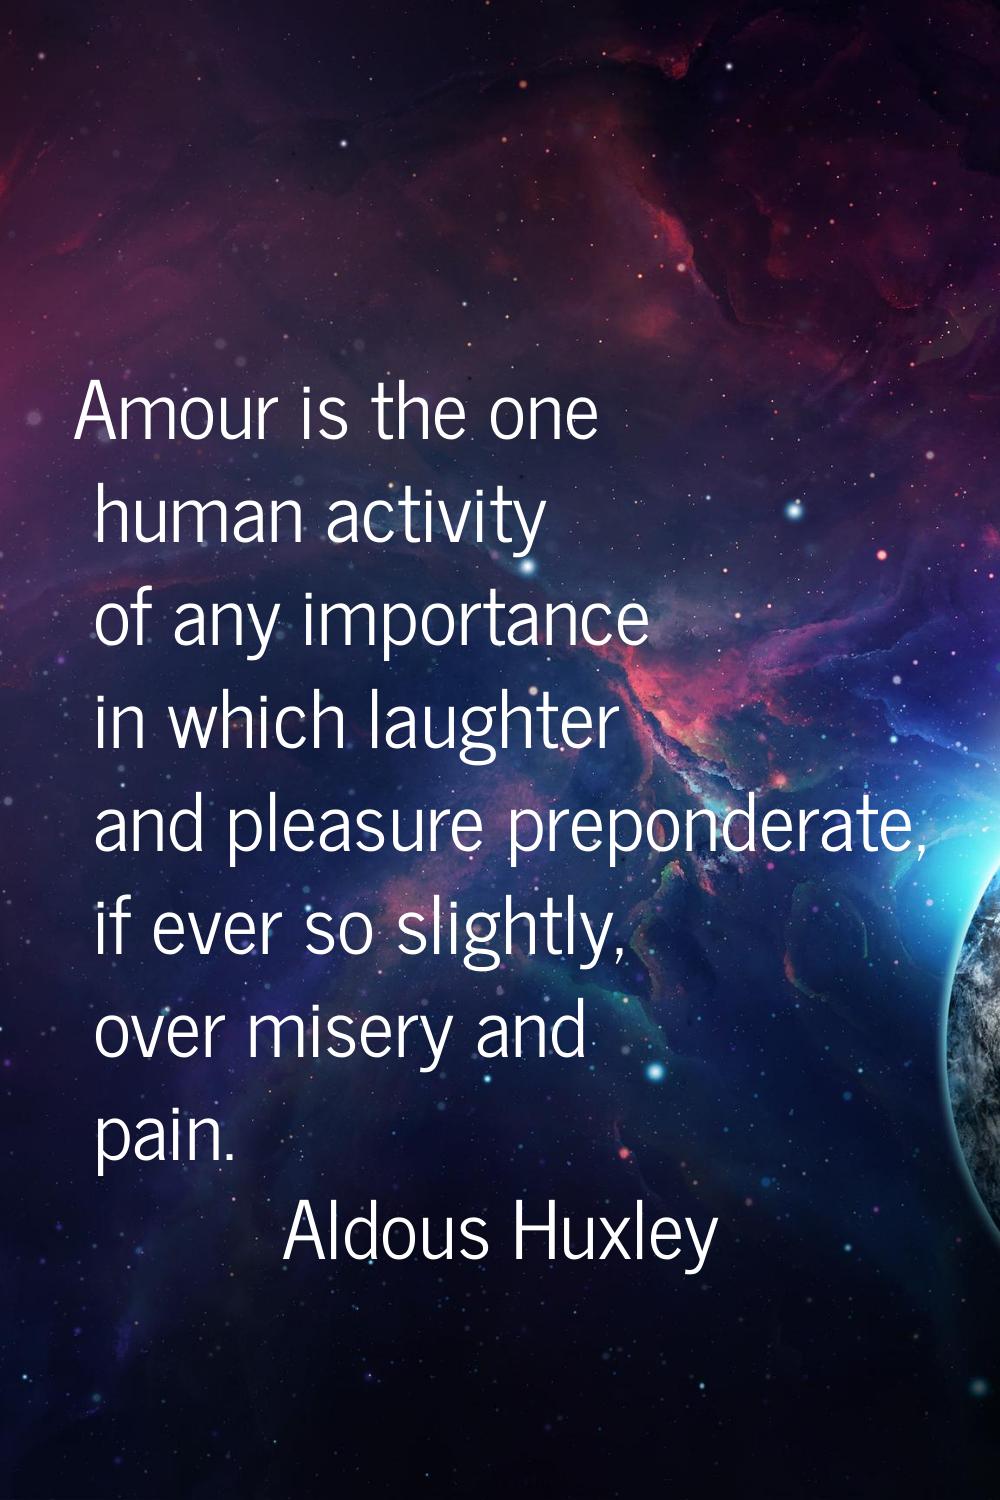 Amour is the one human activity of any importance in which laughter and pleasure preponderate, if e